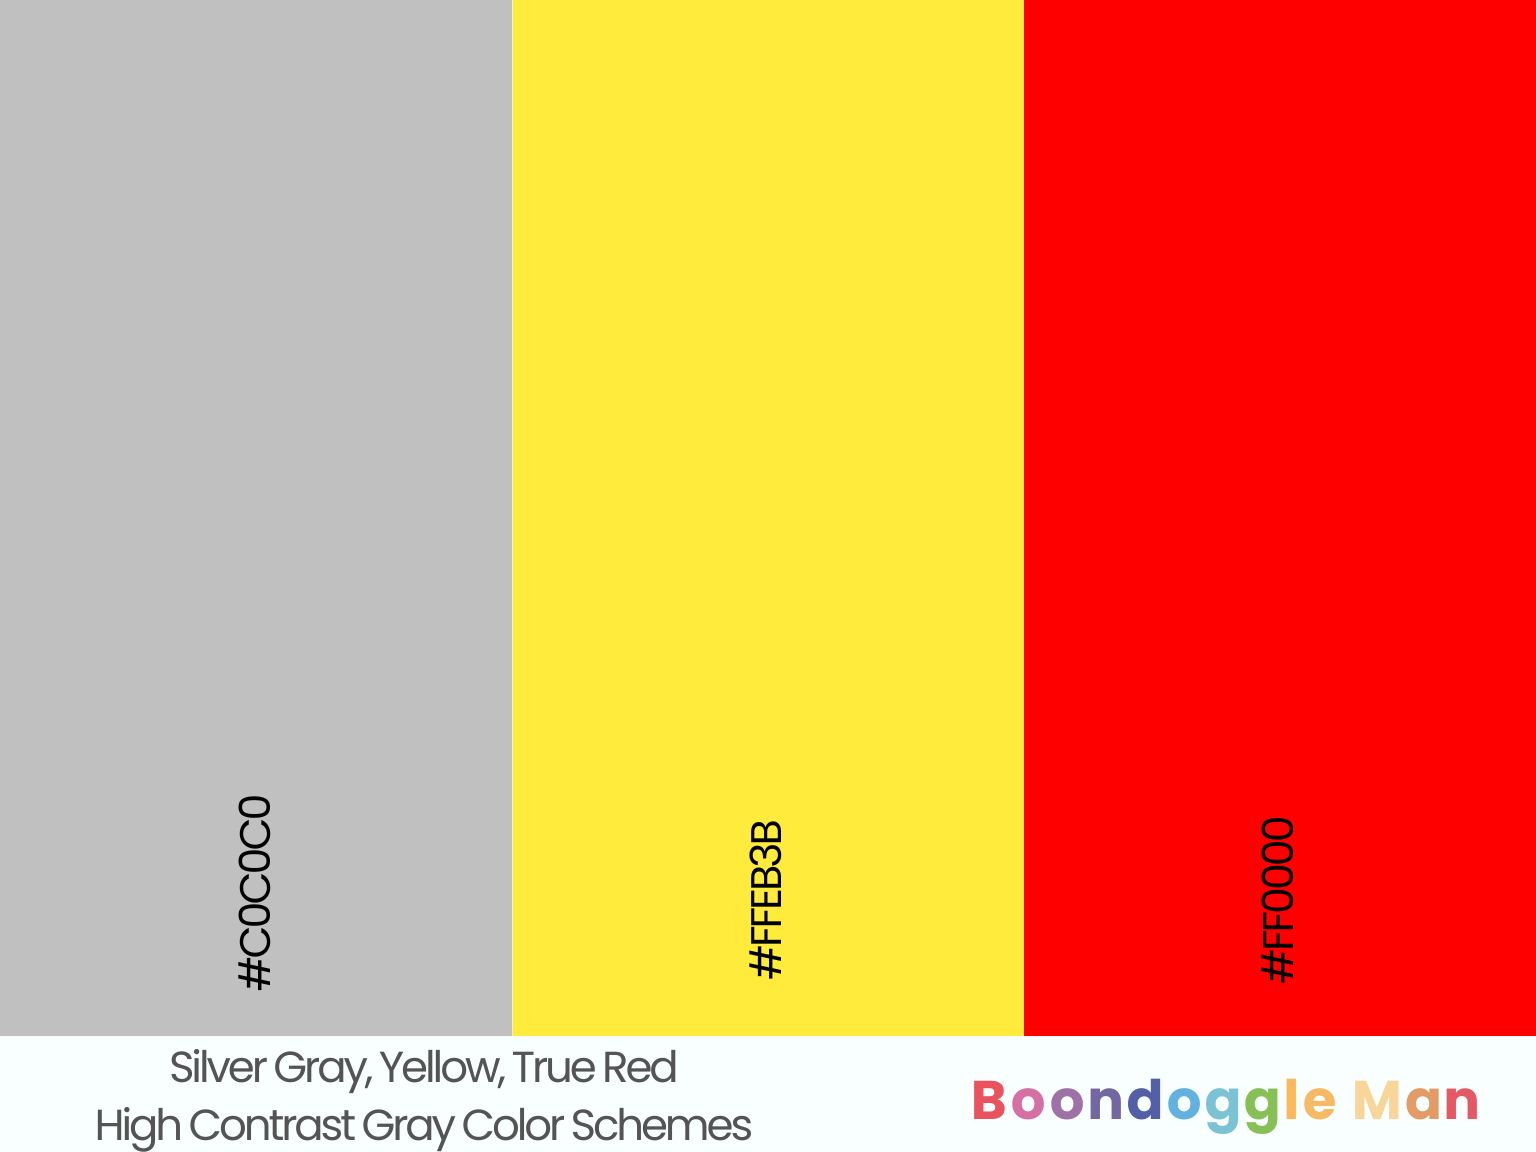 Silver Gray, Yellow, True Red